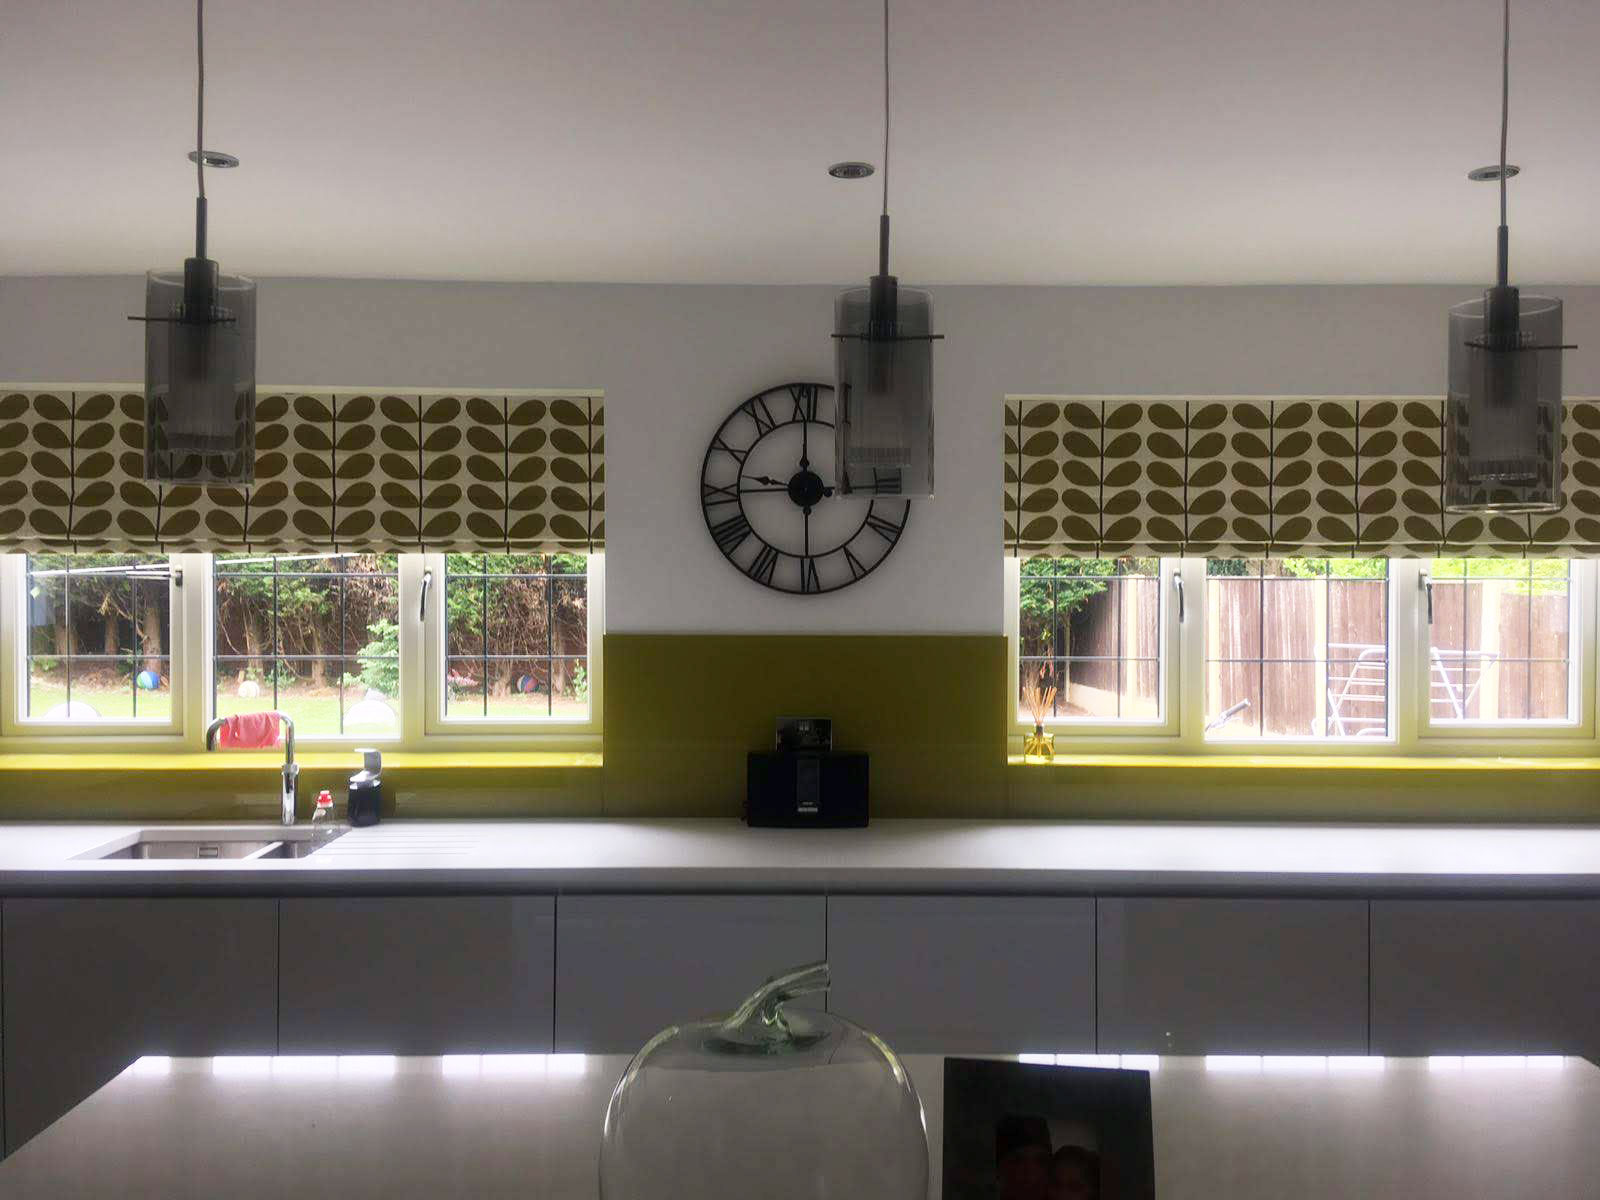 Suppliers of Tailor-Made Roman Blinds For Any Decor UK